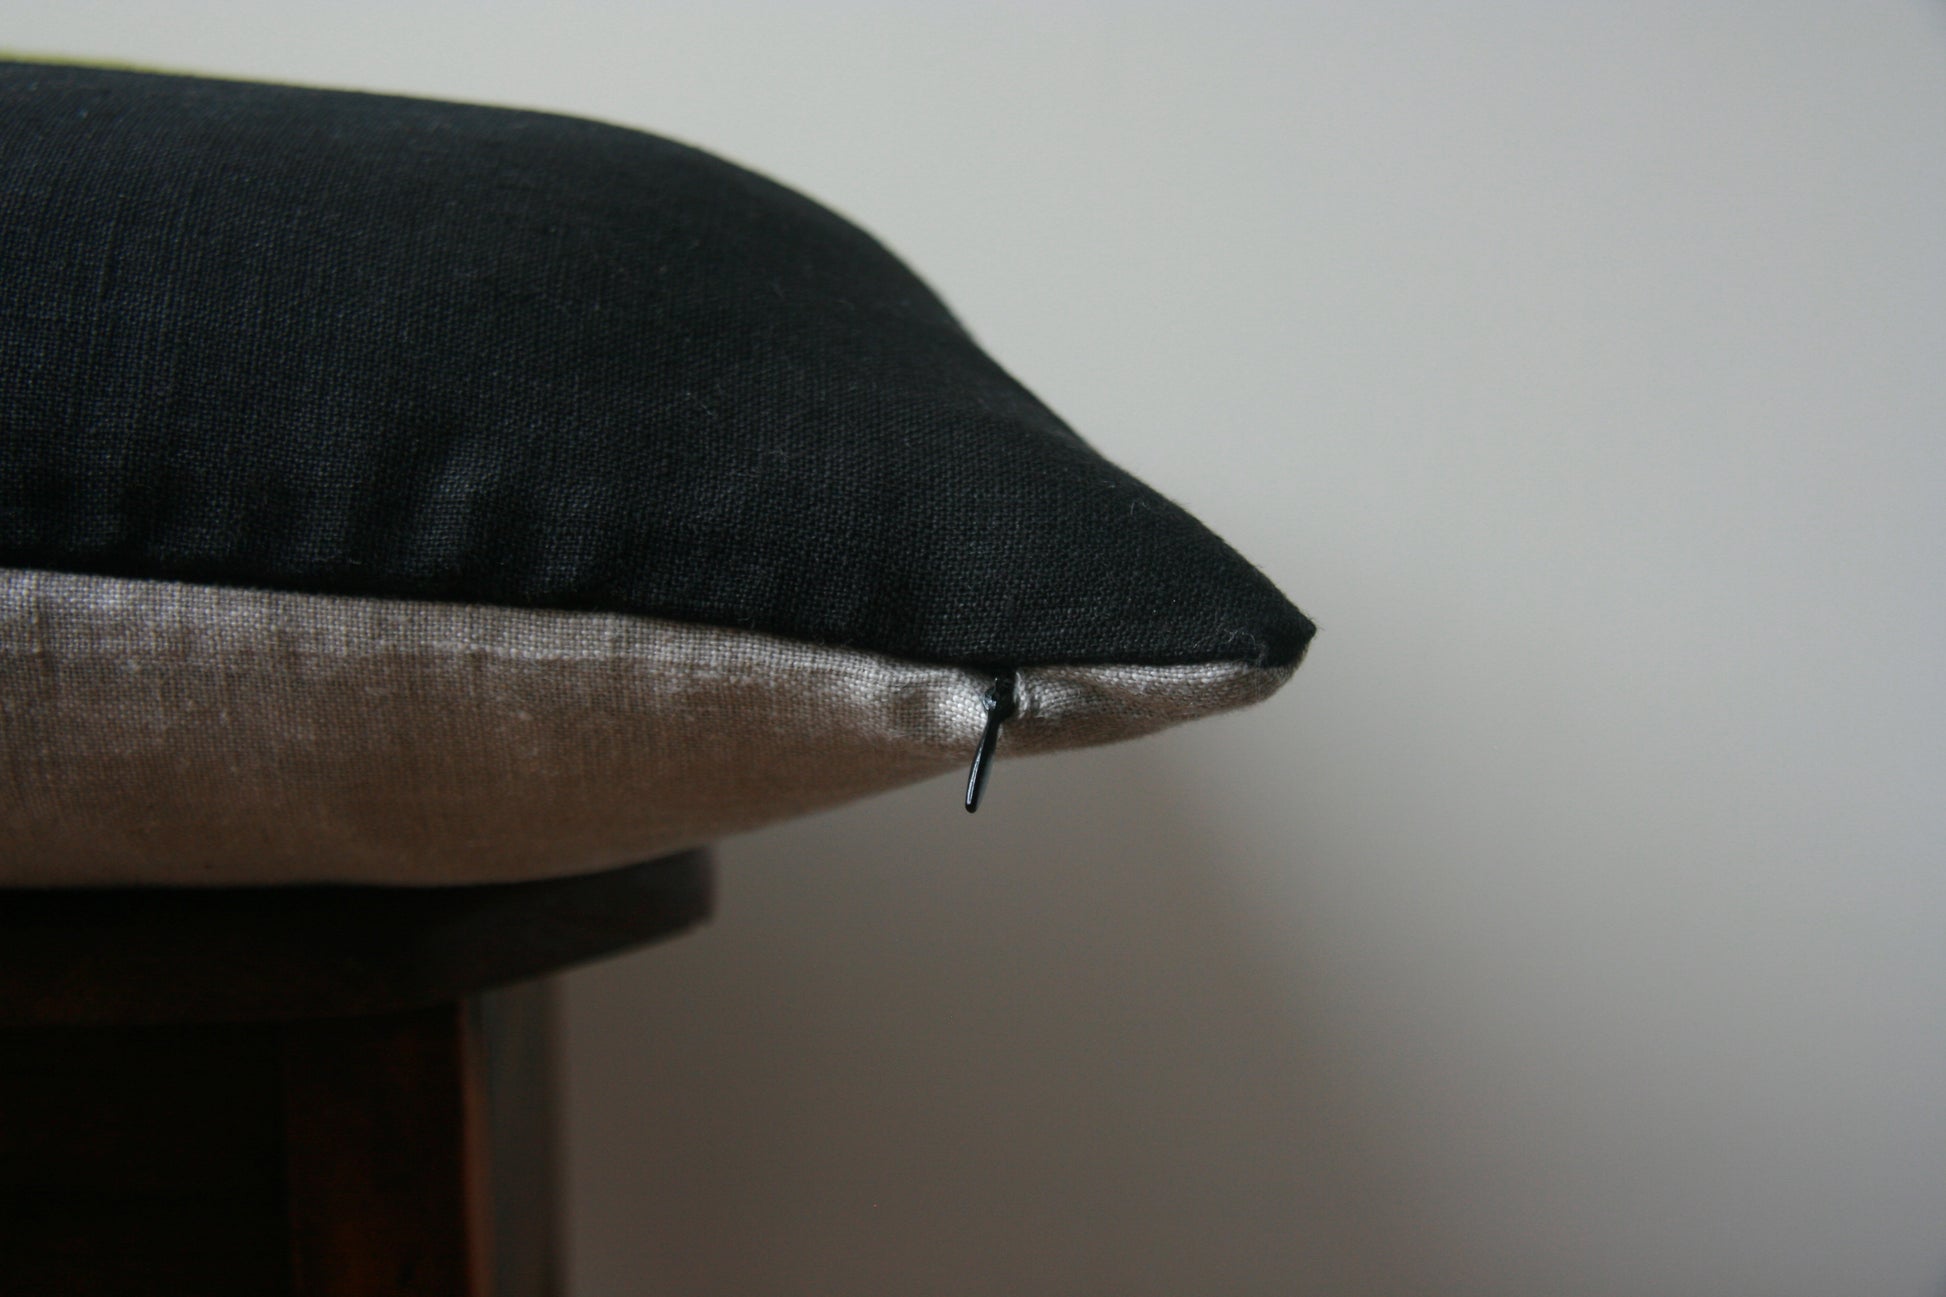 Side profile of cushion cover. Black on top side, natural linen colour on bottom side. Concealed zip with black zipper pull just visible.